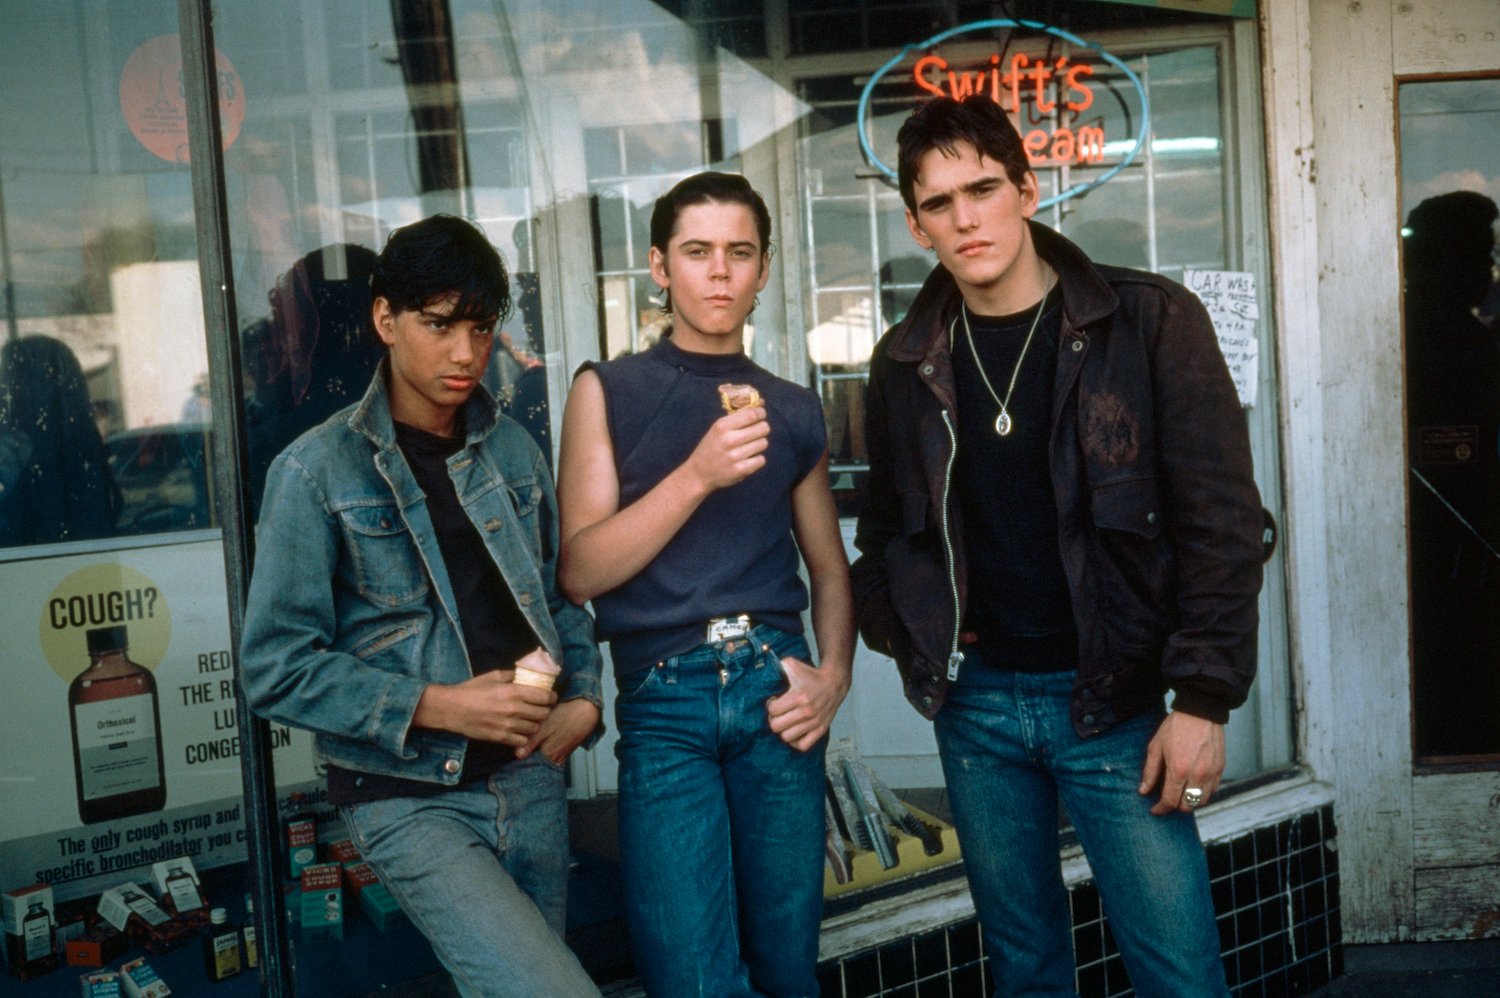 socs gang from the outsiders